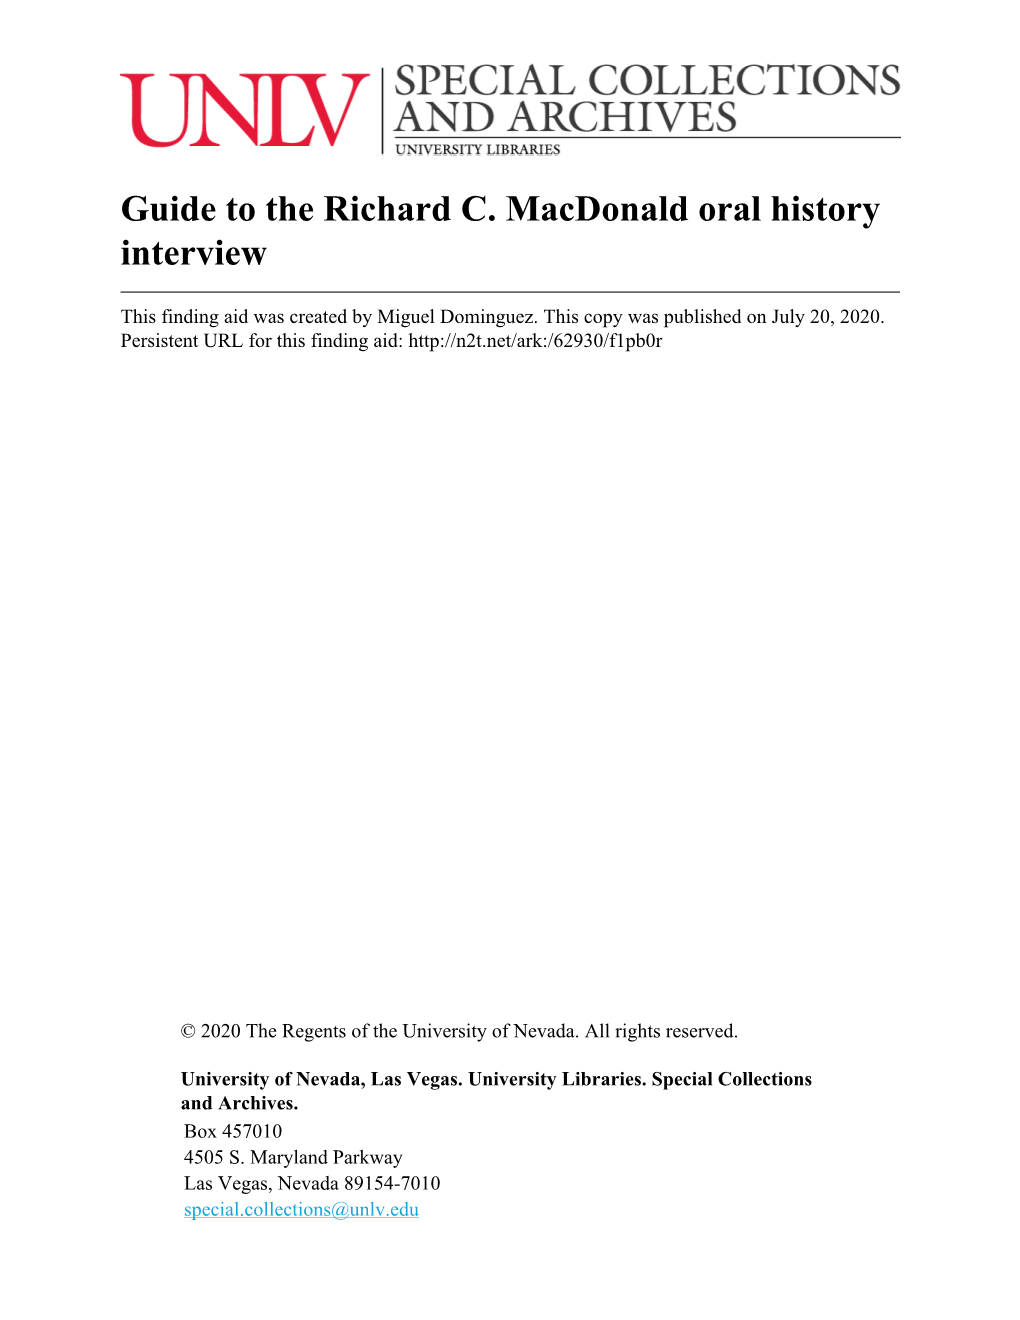 Guide to the Richard C. Macdonald Oral History Interview